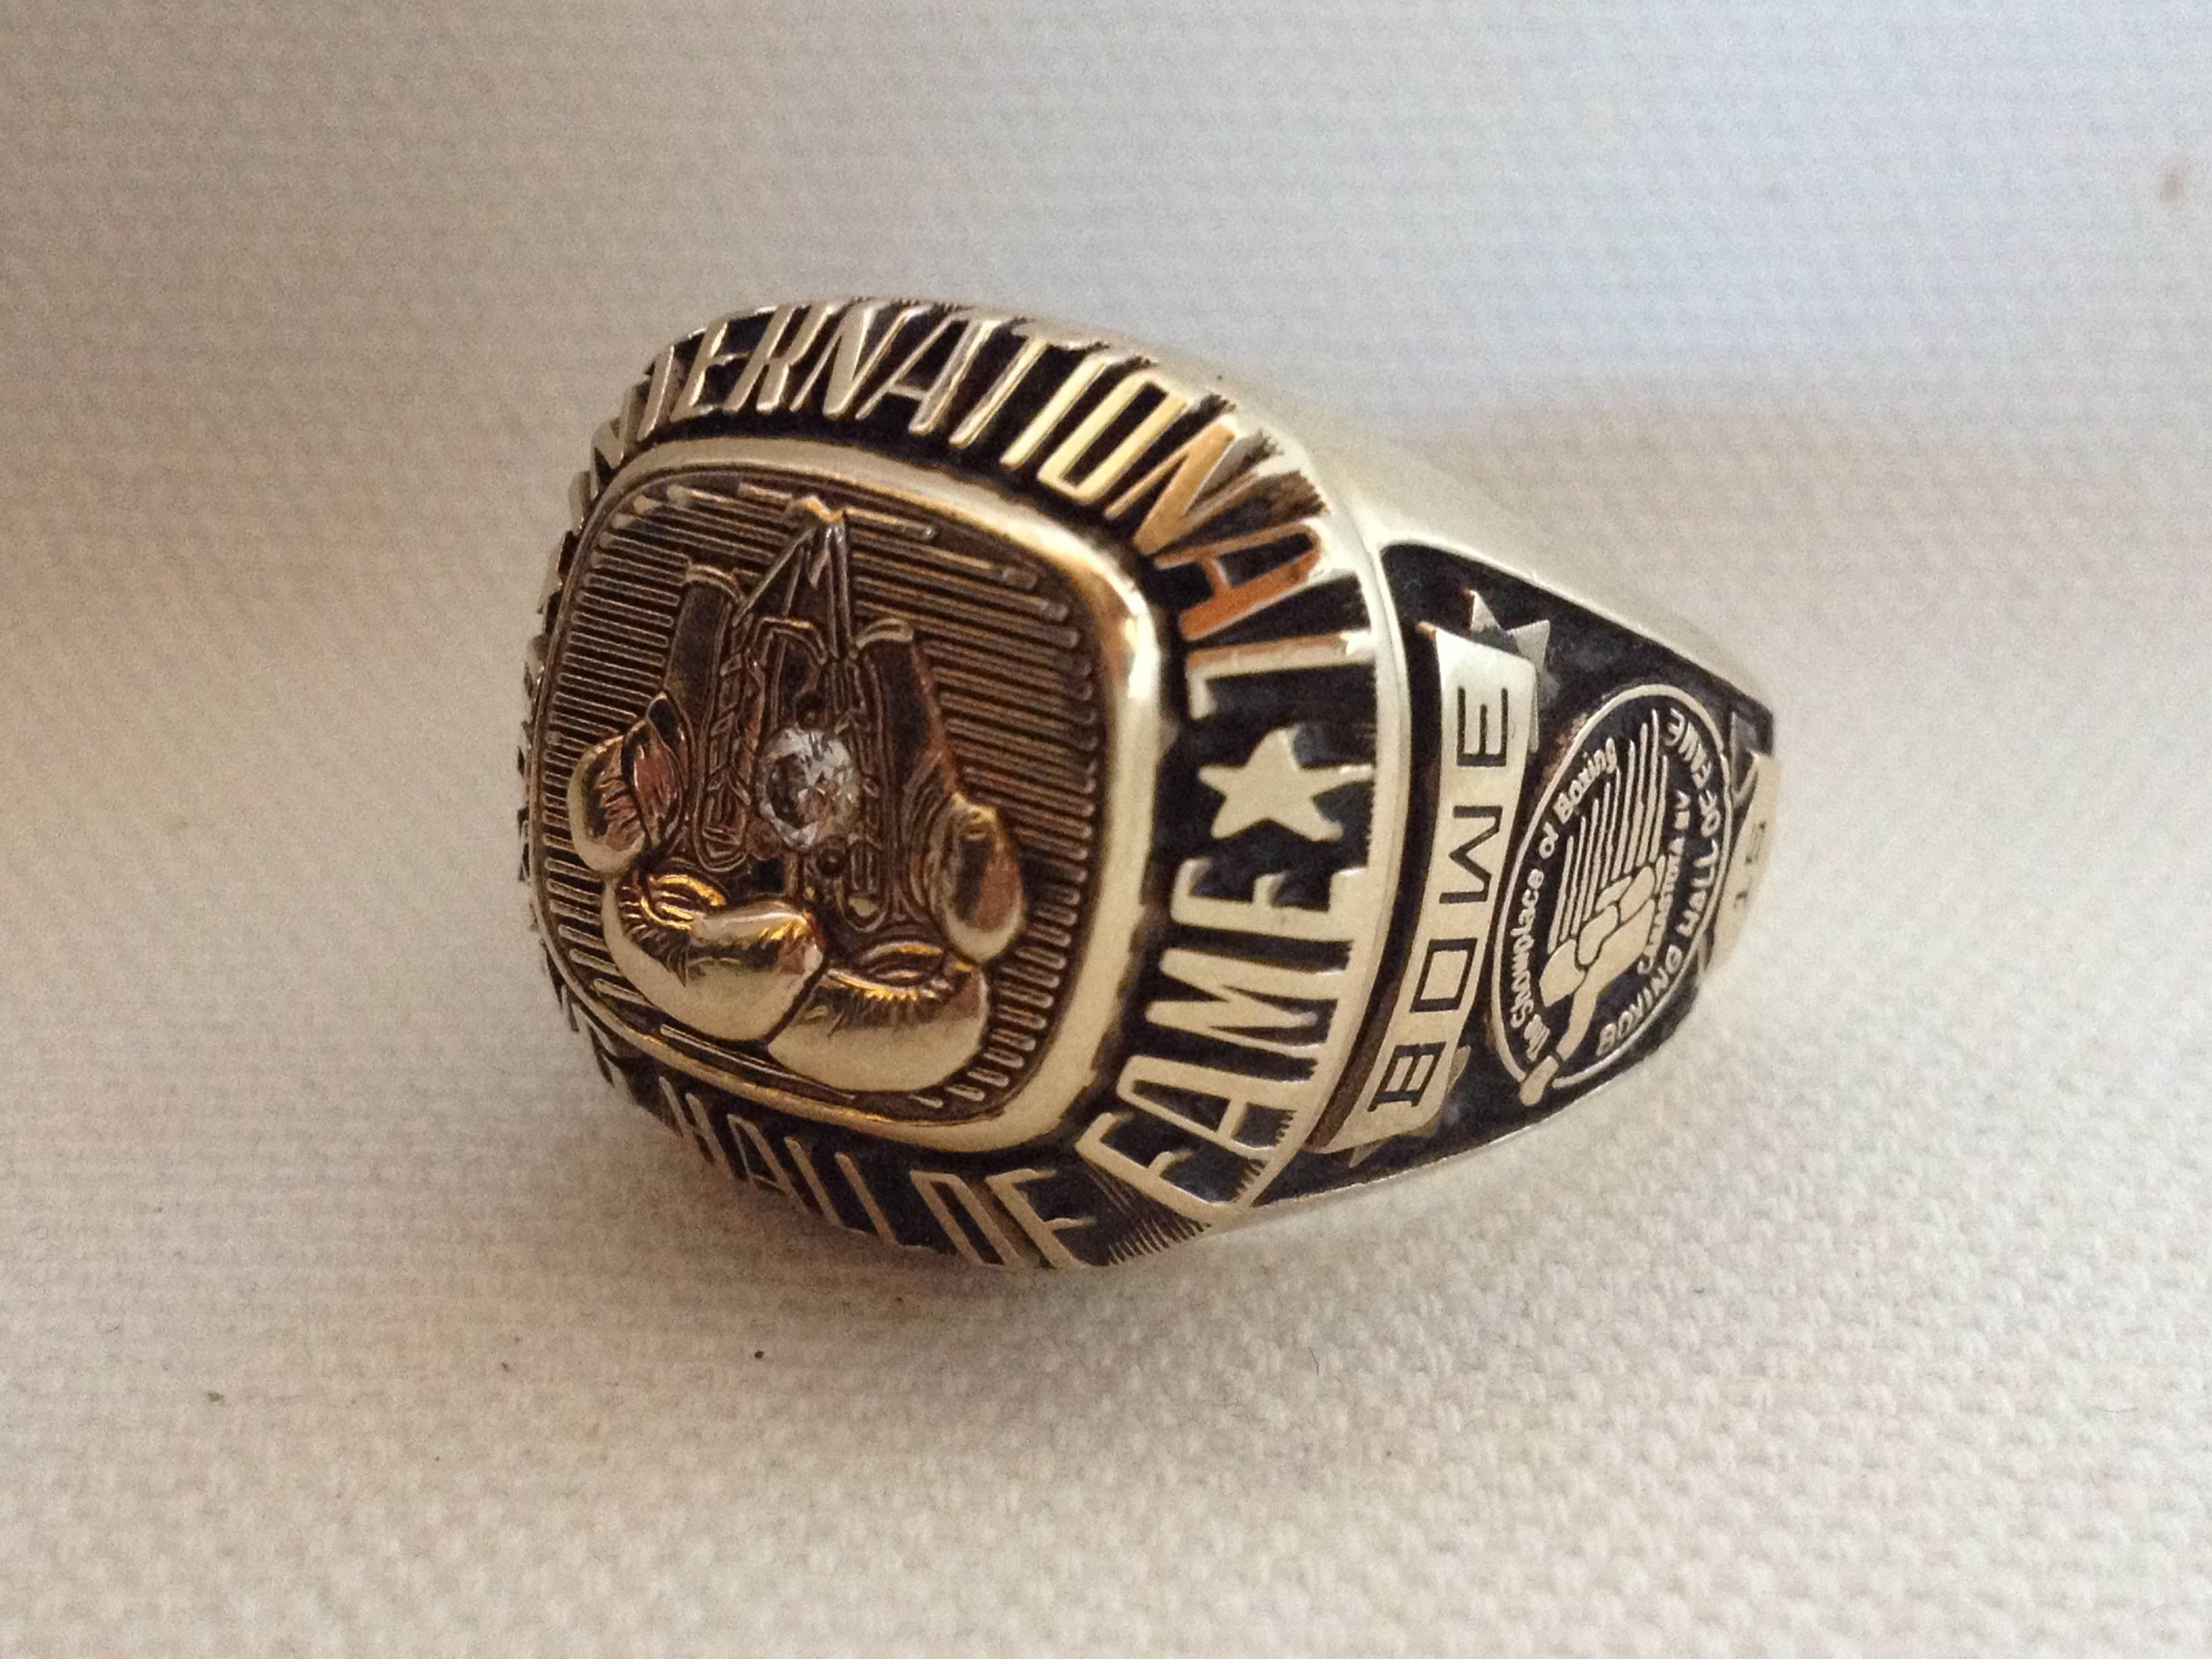 Original International Boxing hall of fame ring presented to Riddick Bowe. Manufactured by balfour made of 10-karart gold with real, genuine high grade diamond. This ring is the original issued ring presented to Riddick Bowe for his induction into